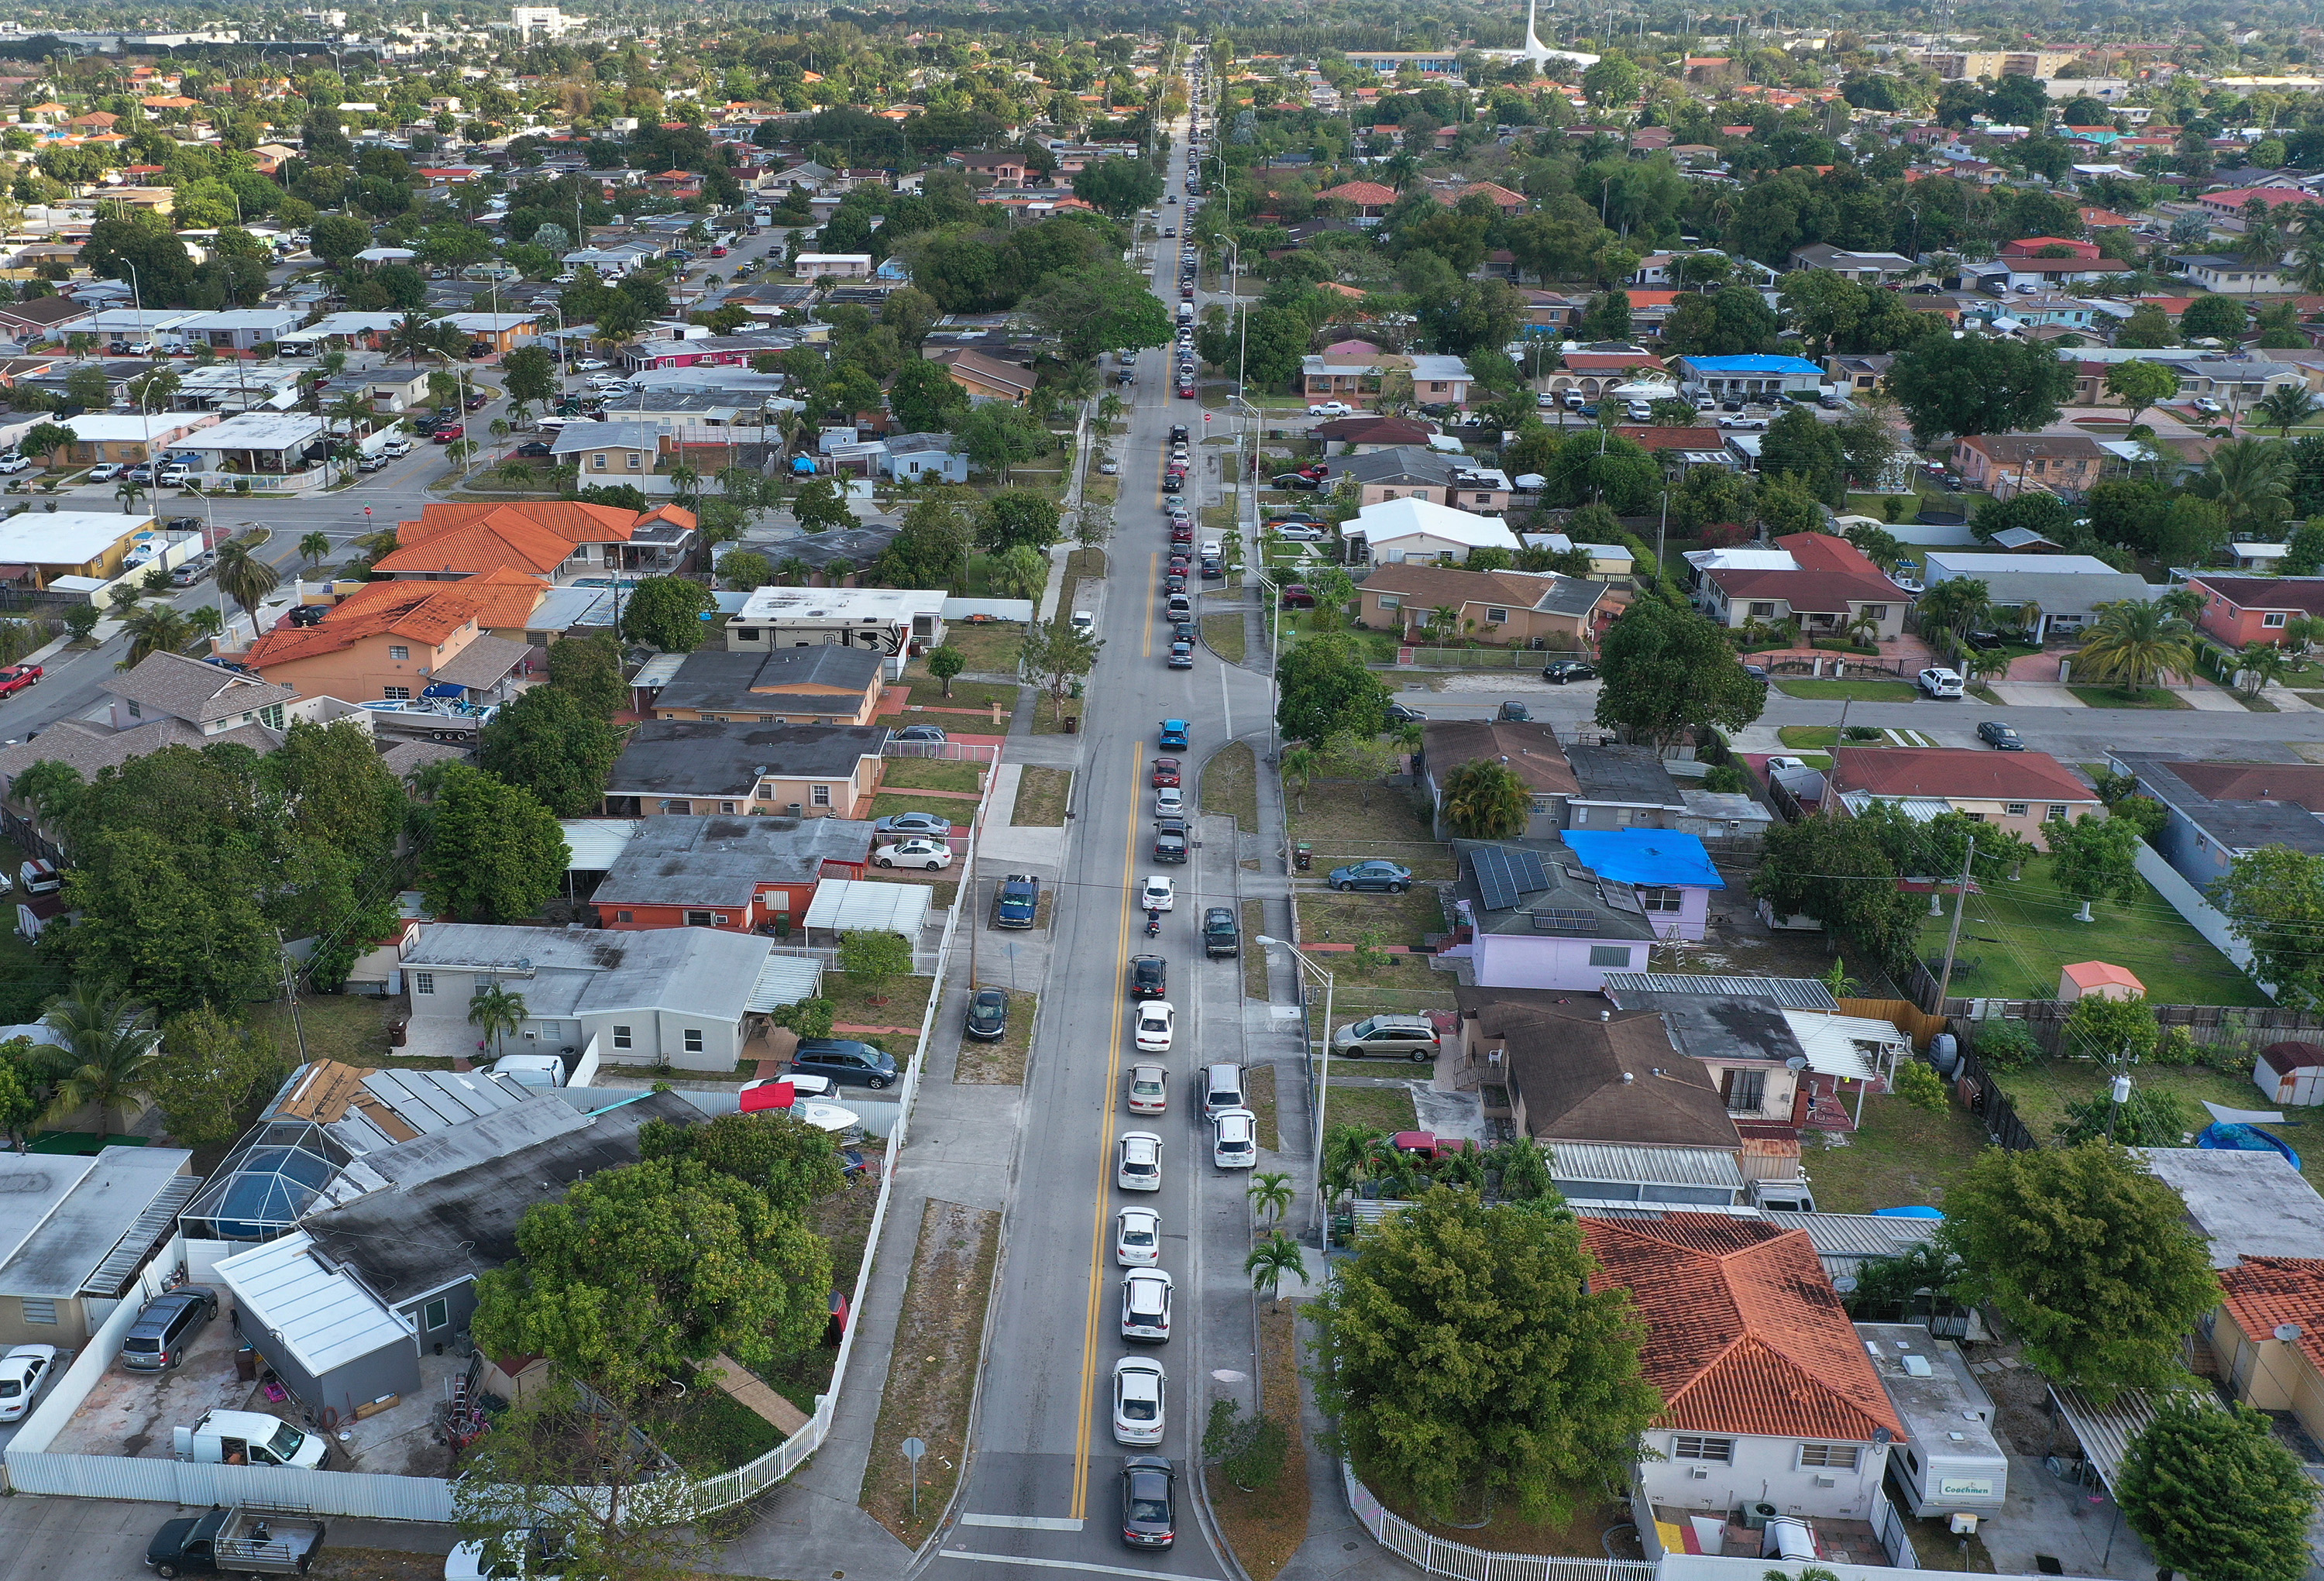 An aerial view from a drone shows vehicles lining up to receive unemployment applications in Hialeah, Florida, on April 8. The applications were being distributed by City of Hialeah employees in front of the John F. Kennedy Library.